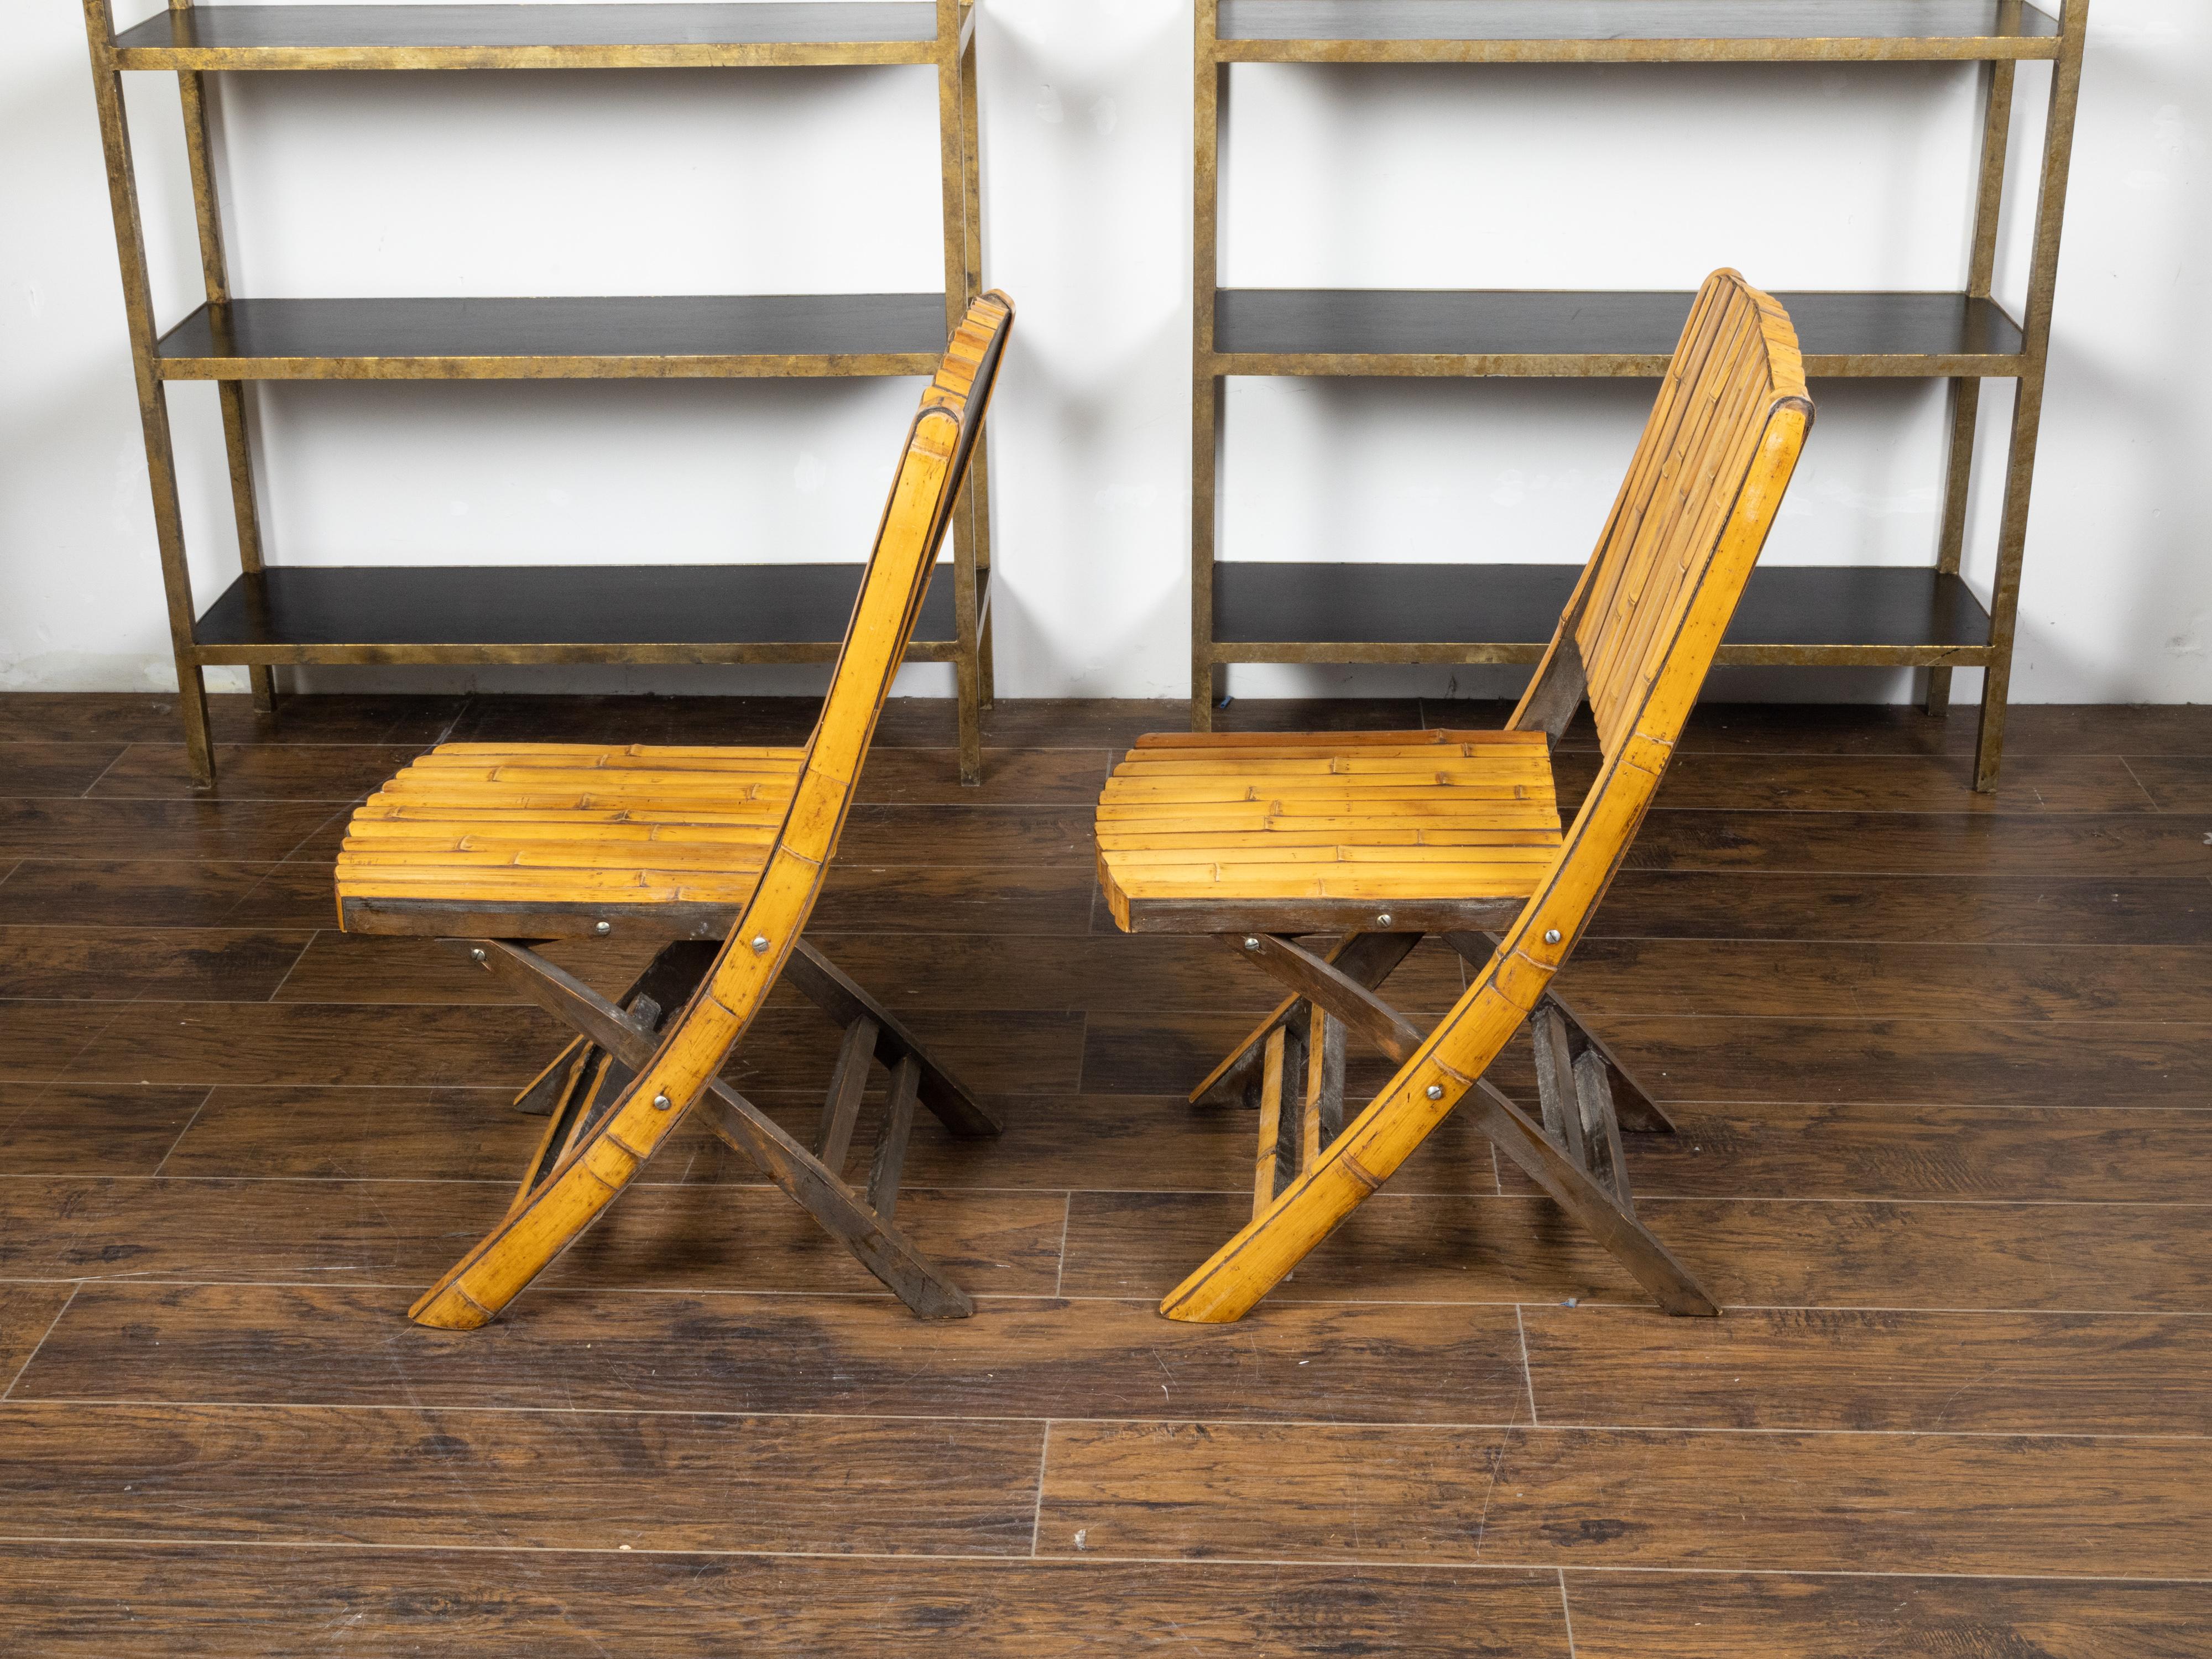 Pair of Midcentury Bamboo Folding Chairs with Slatted Design and Light Patina For Sale 3